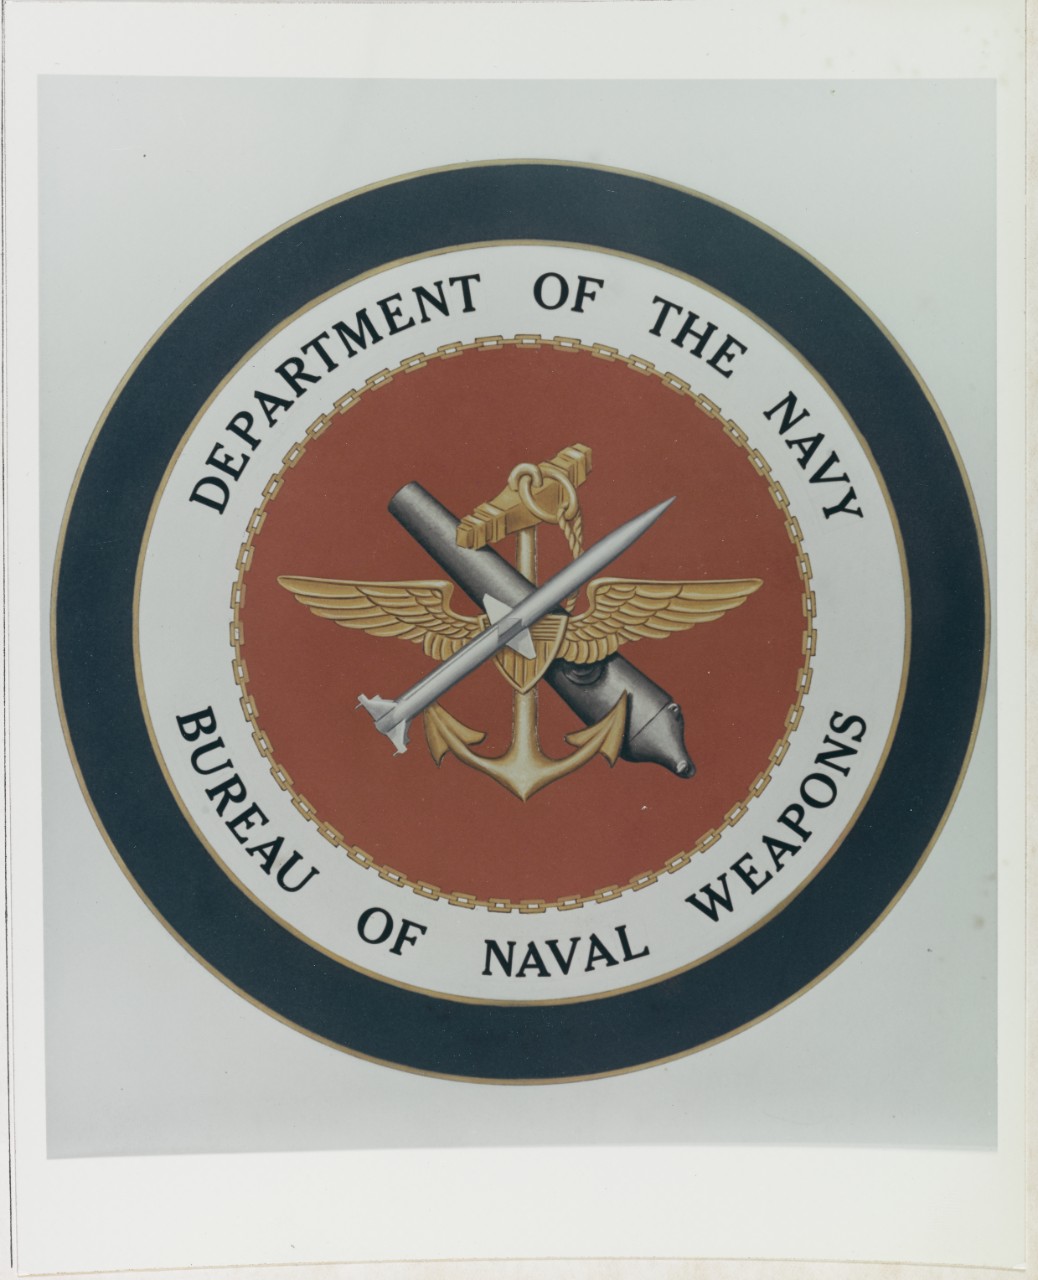 Insignia: Department of the Navy Bureau of Naval Weapons. Circa 1960.